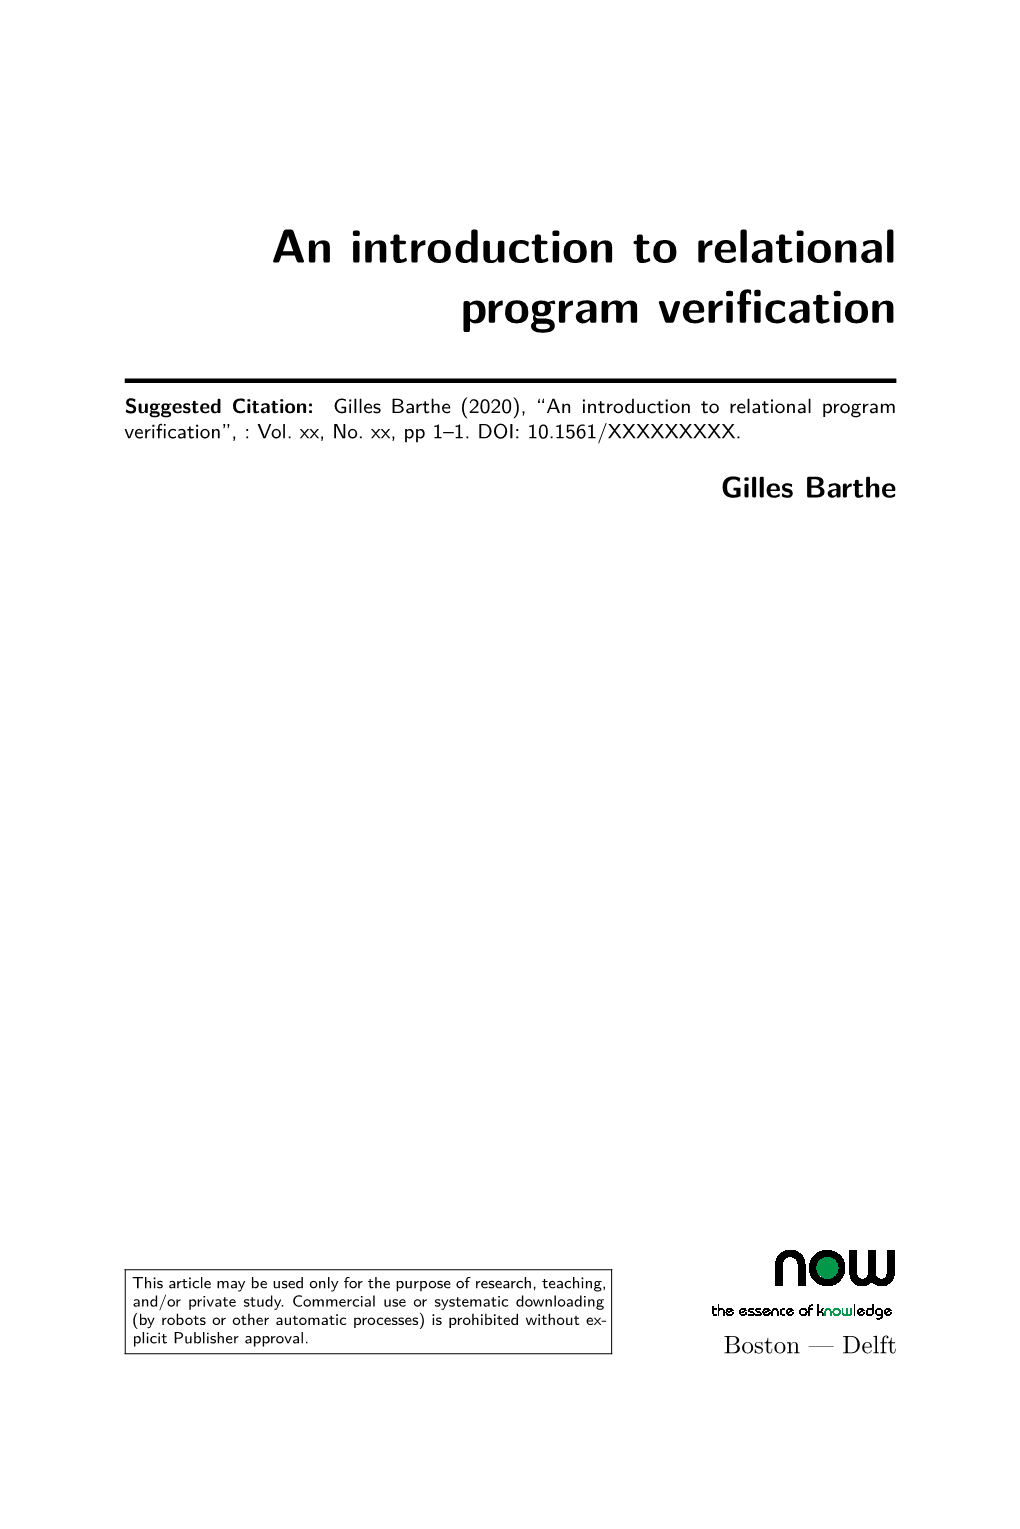 An Introduction to Relational Program Verification